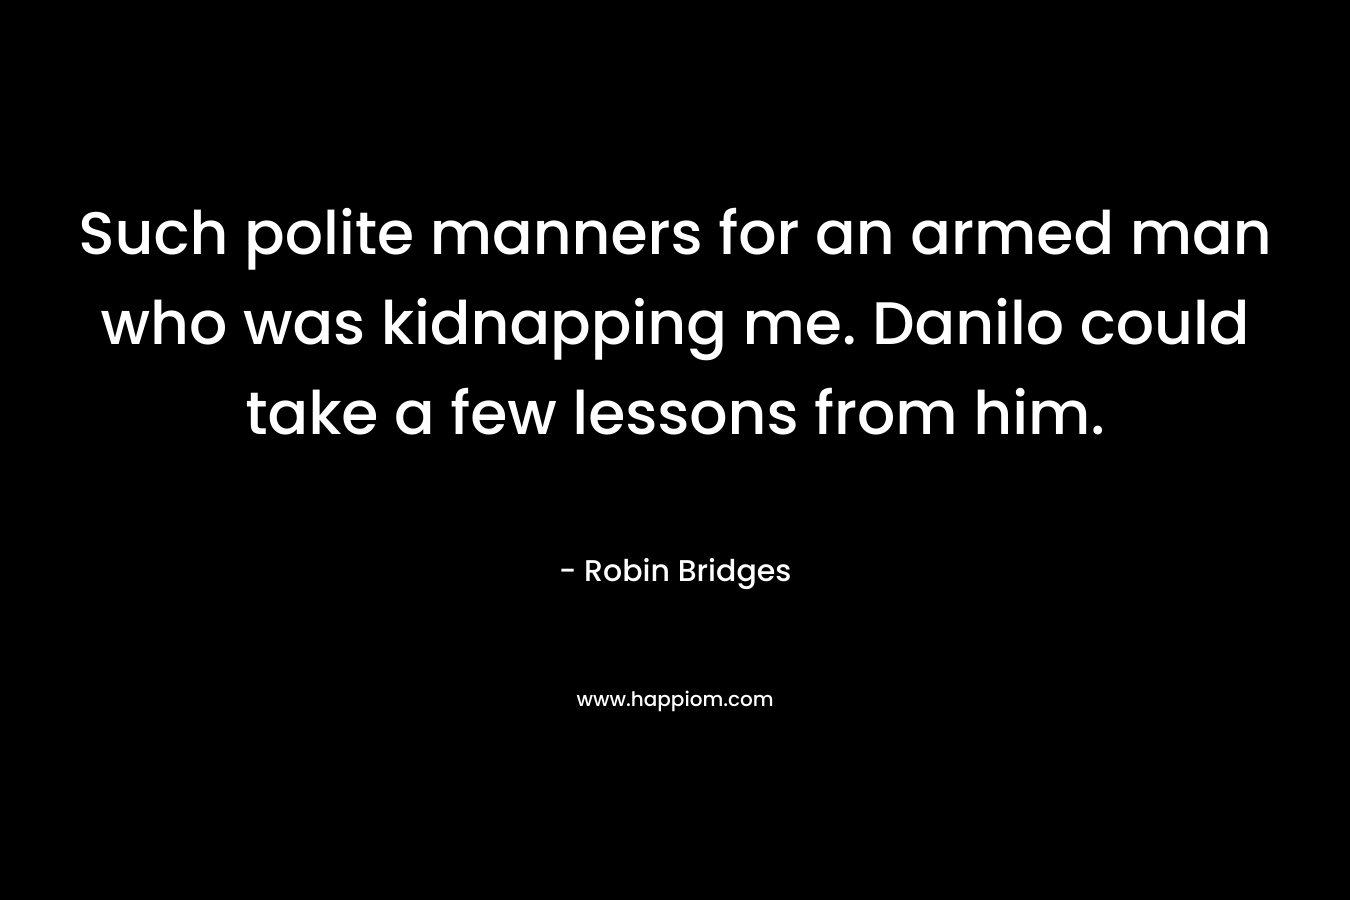 Such polite manners for an armed man who was kidnapping me. Danilo could take a few lessons from him. – Robin Bridges